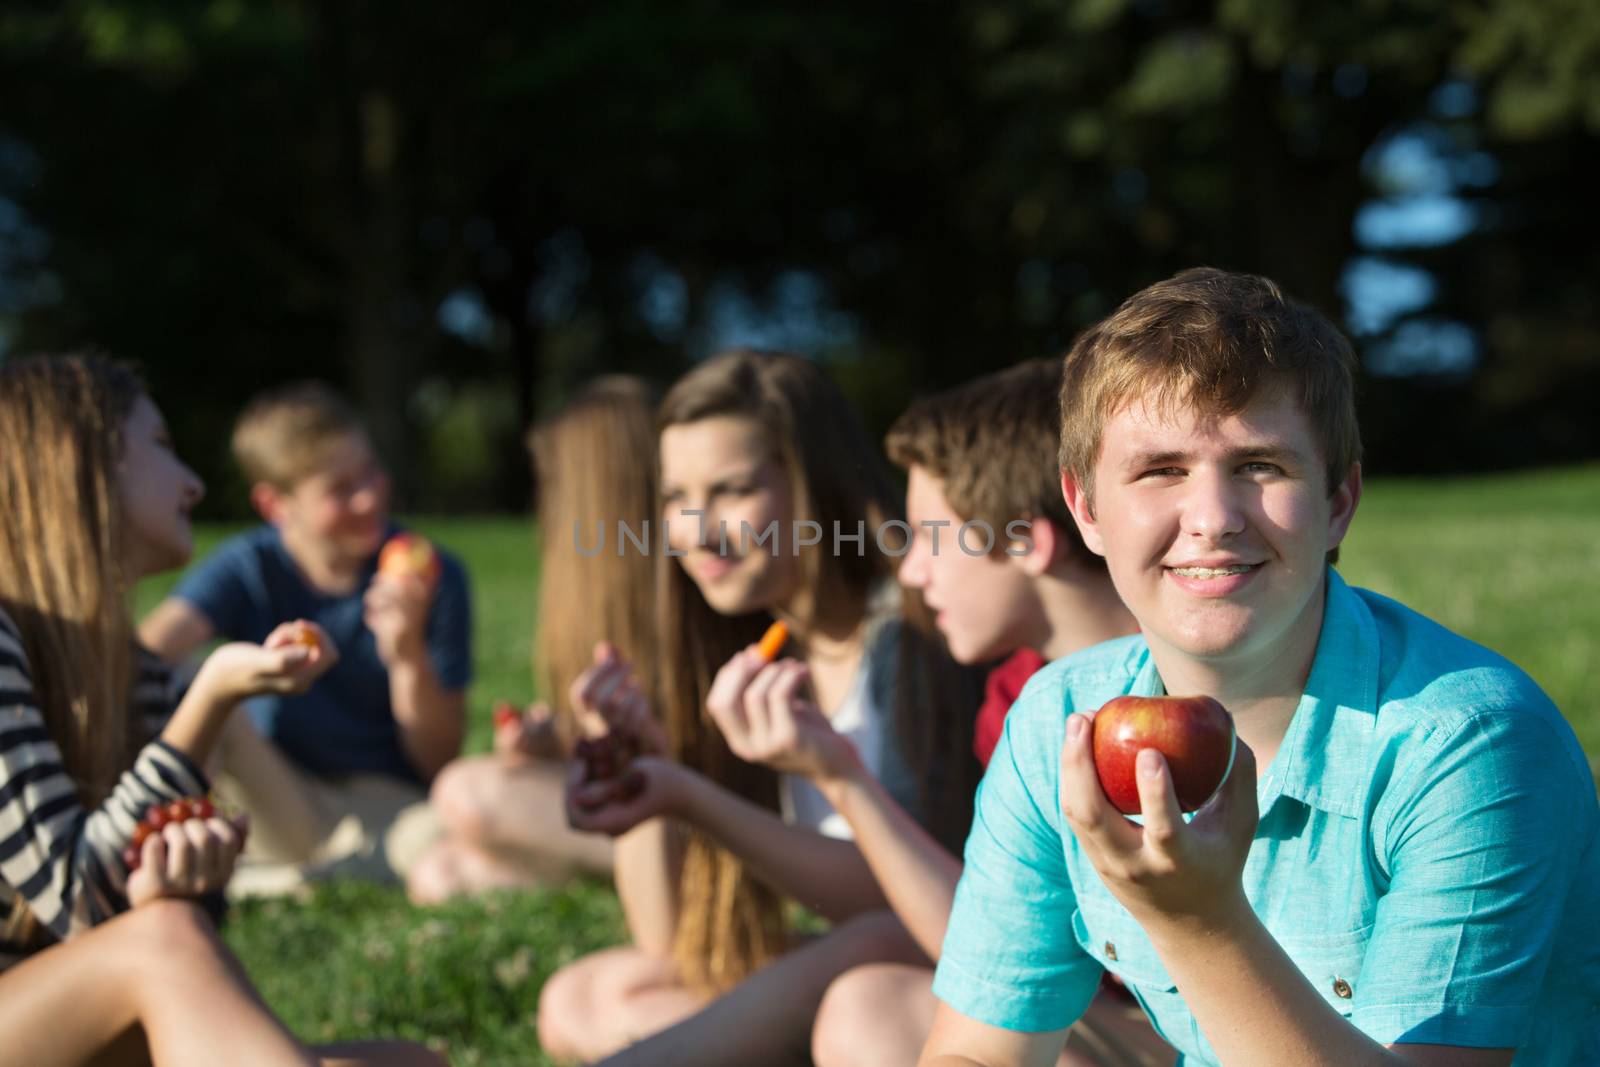 Teen Male Holding an Apple by Creatista